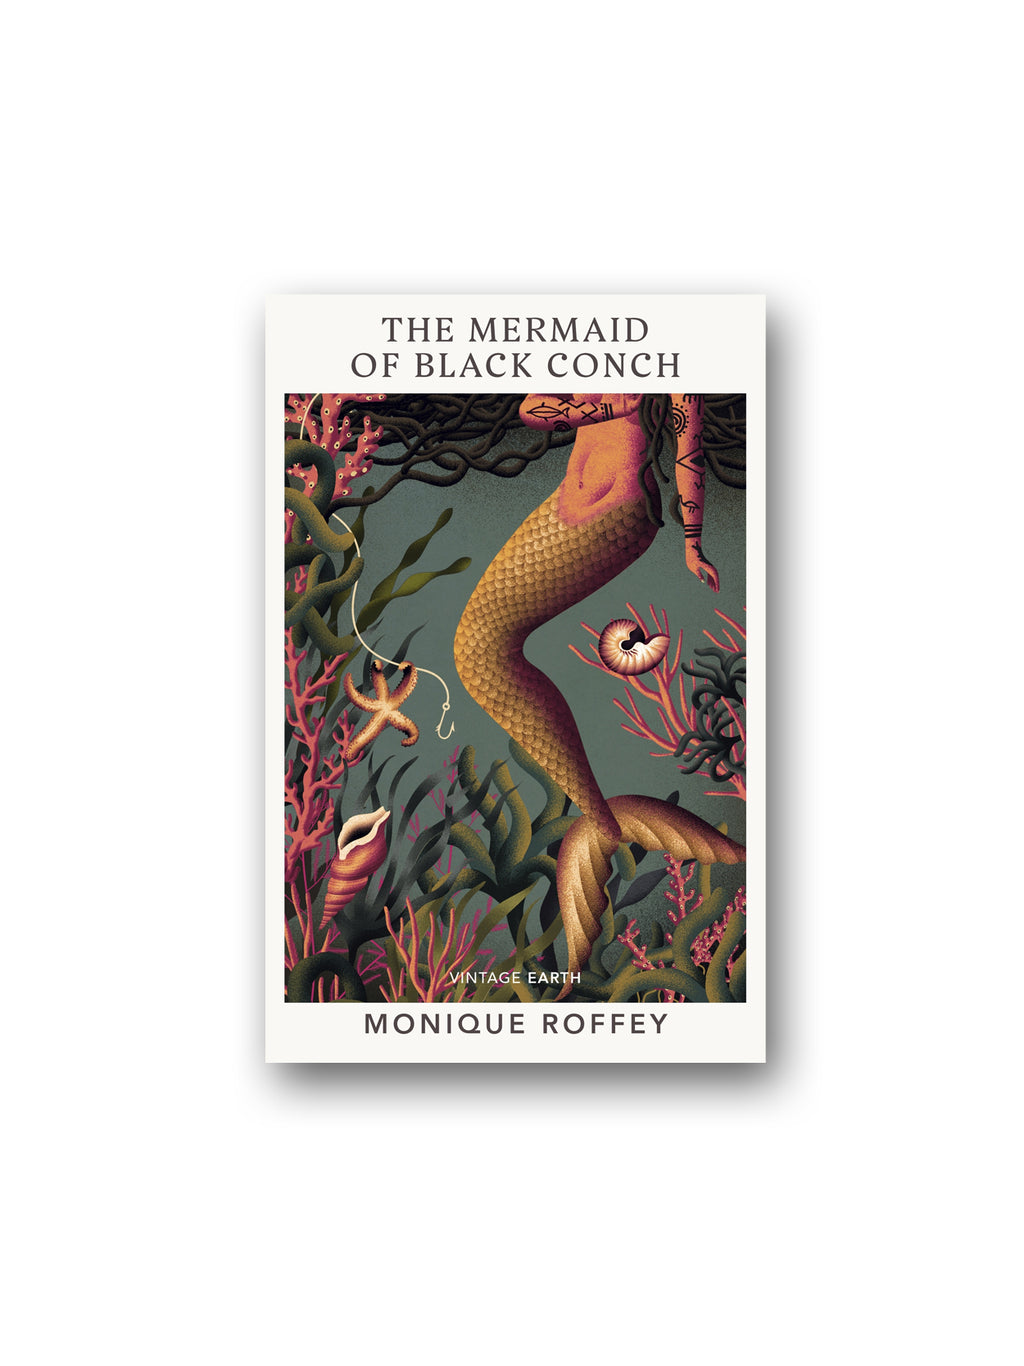 The Mermaid of Black Conch : A novel from the Vintage Earth collection